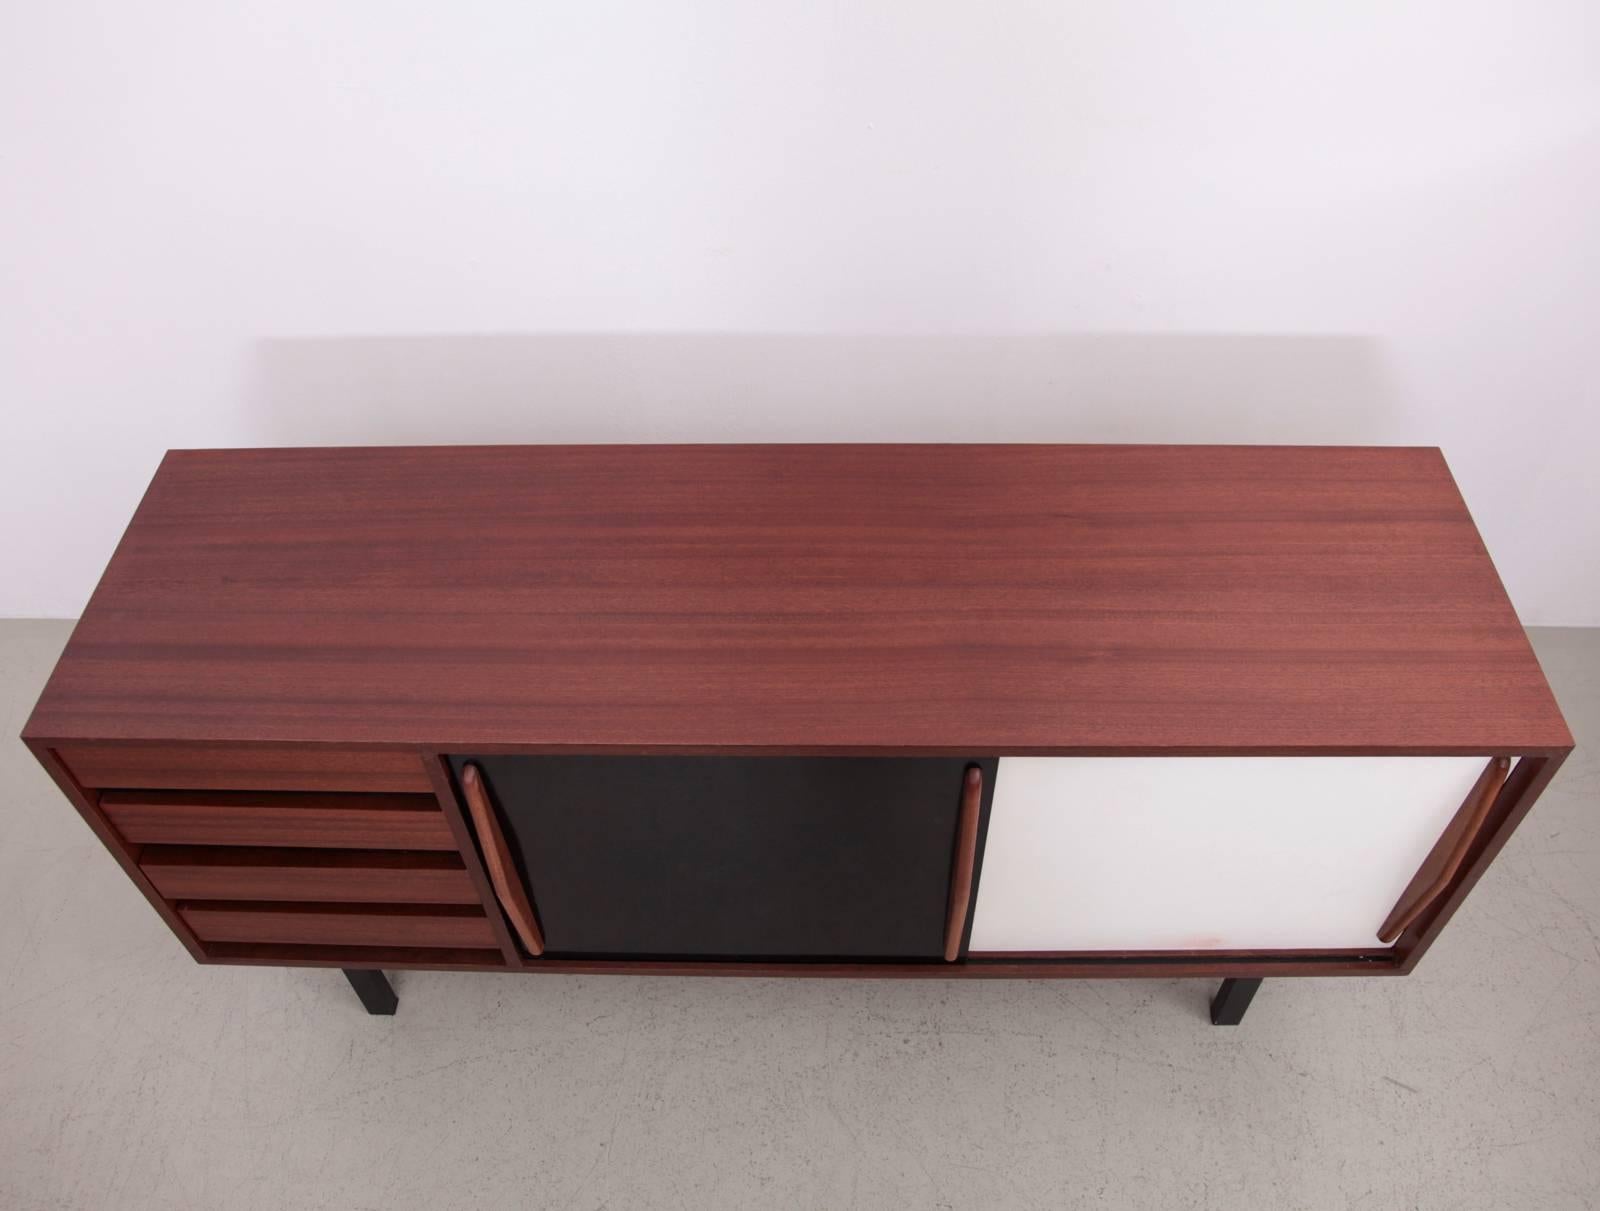 Formica Charlotte Perriand Cansado Sideboard by Steph Simon in Mahogany